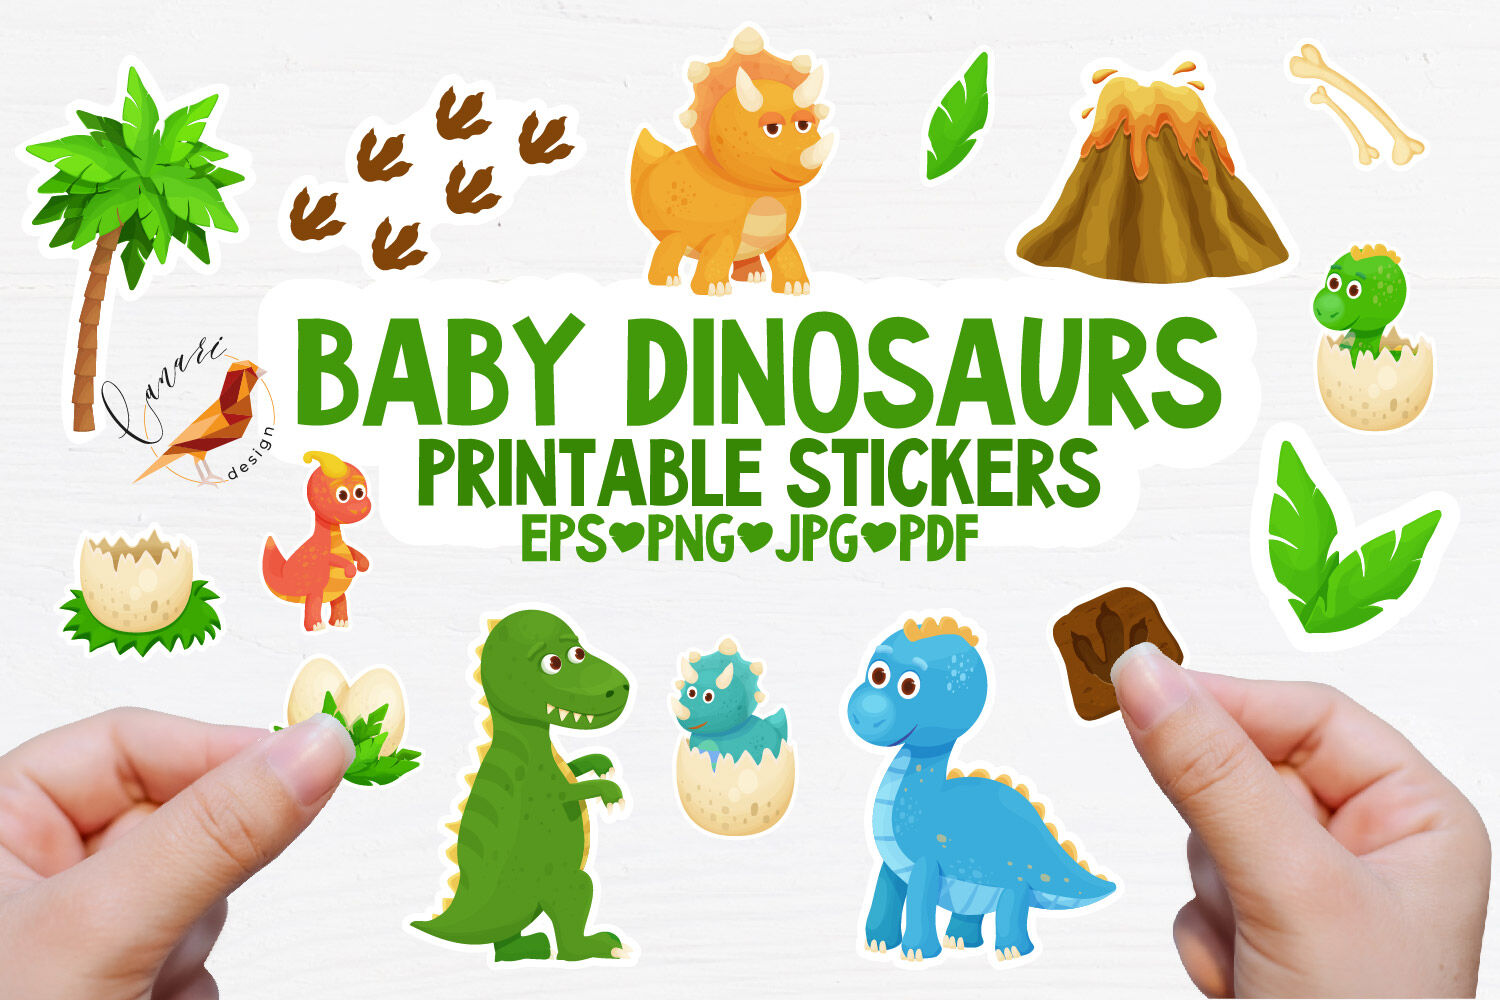 Dinosaur BABY Printable stickers PDF PNG By Canaridesign